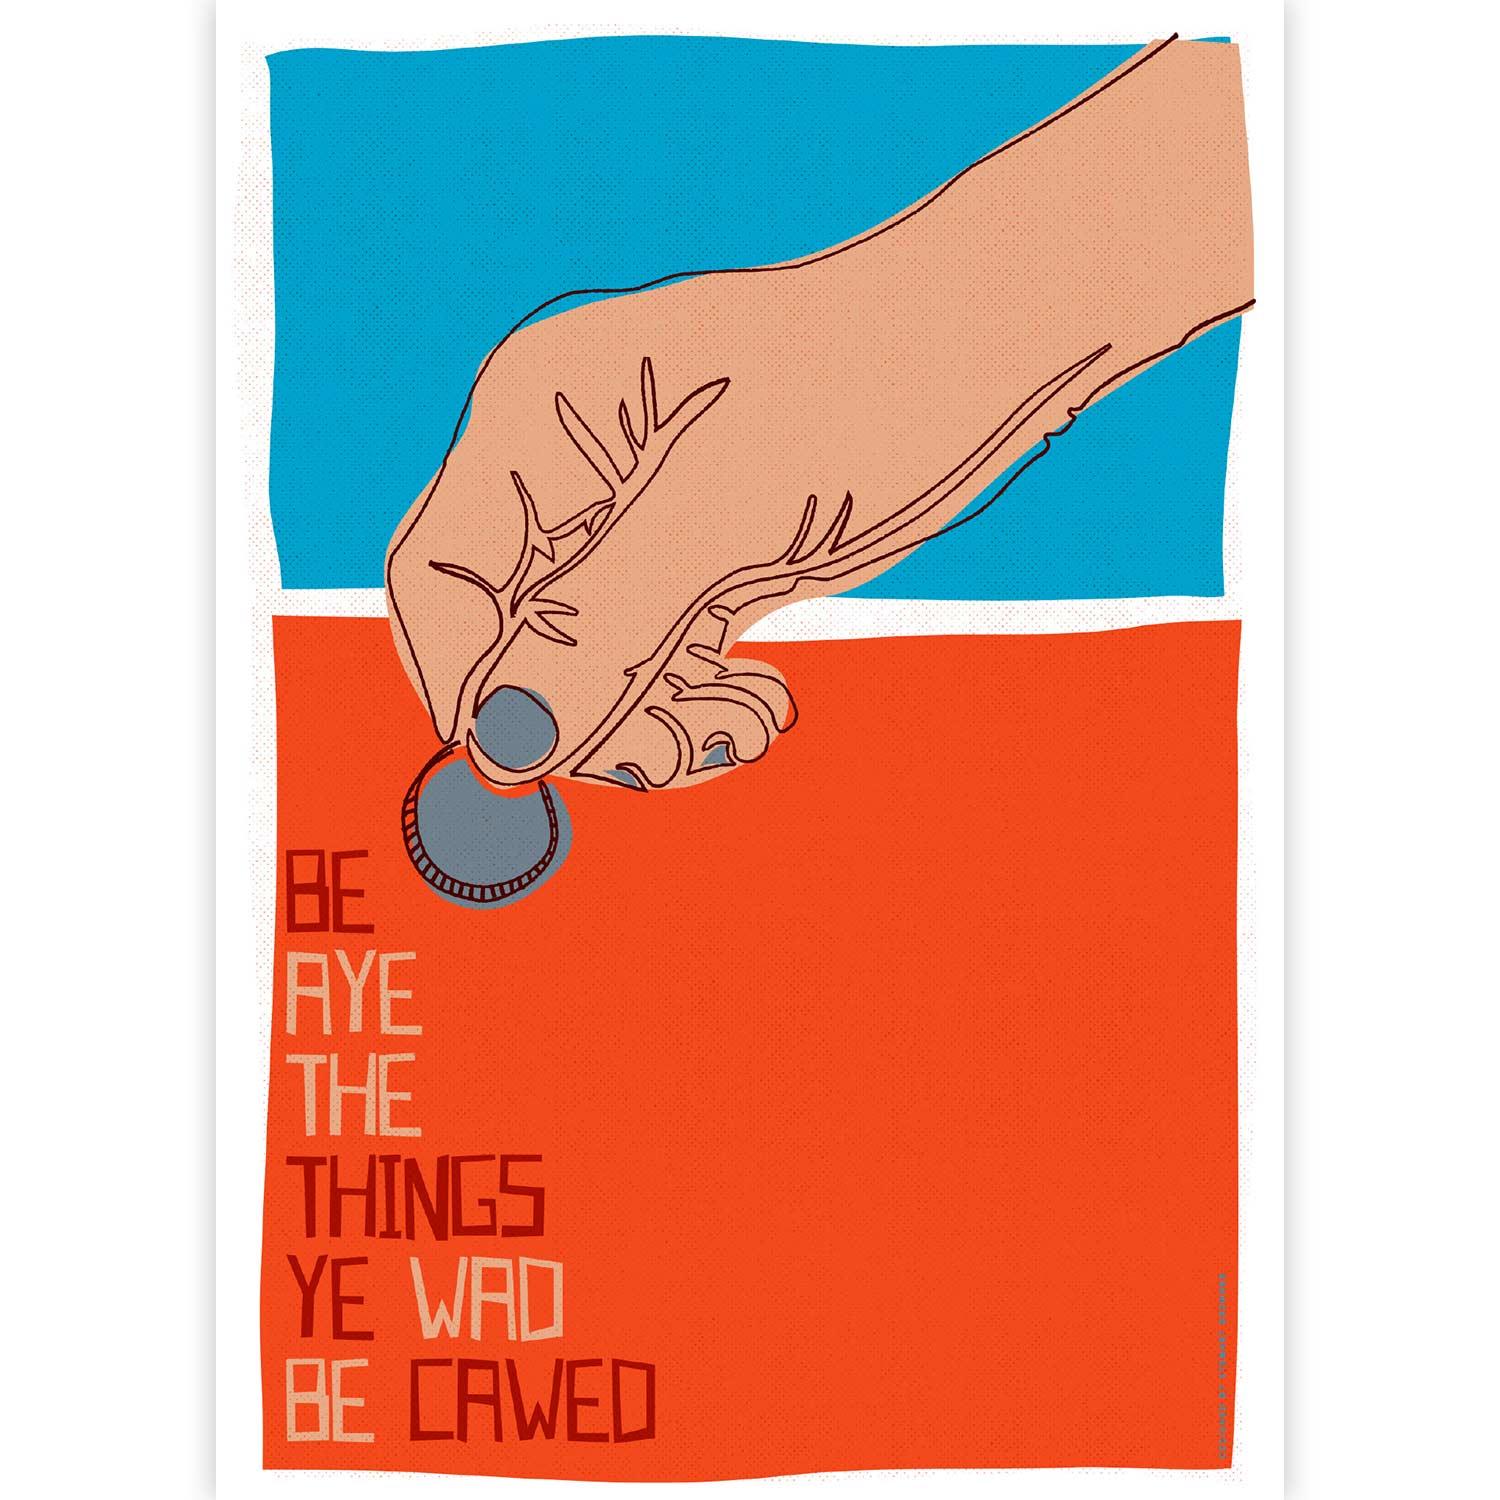 Be aye the things ye wad be cawed by Stewart Bremner